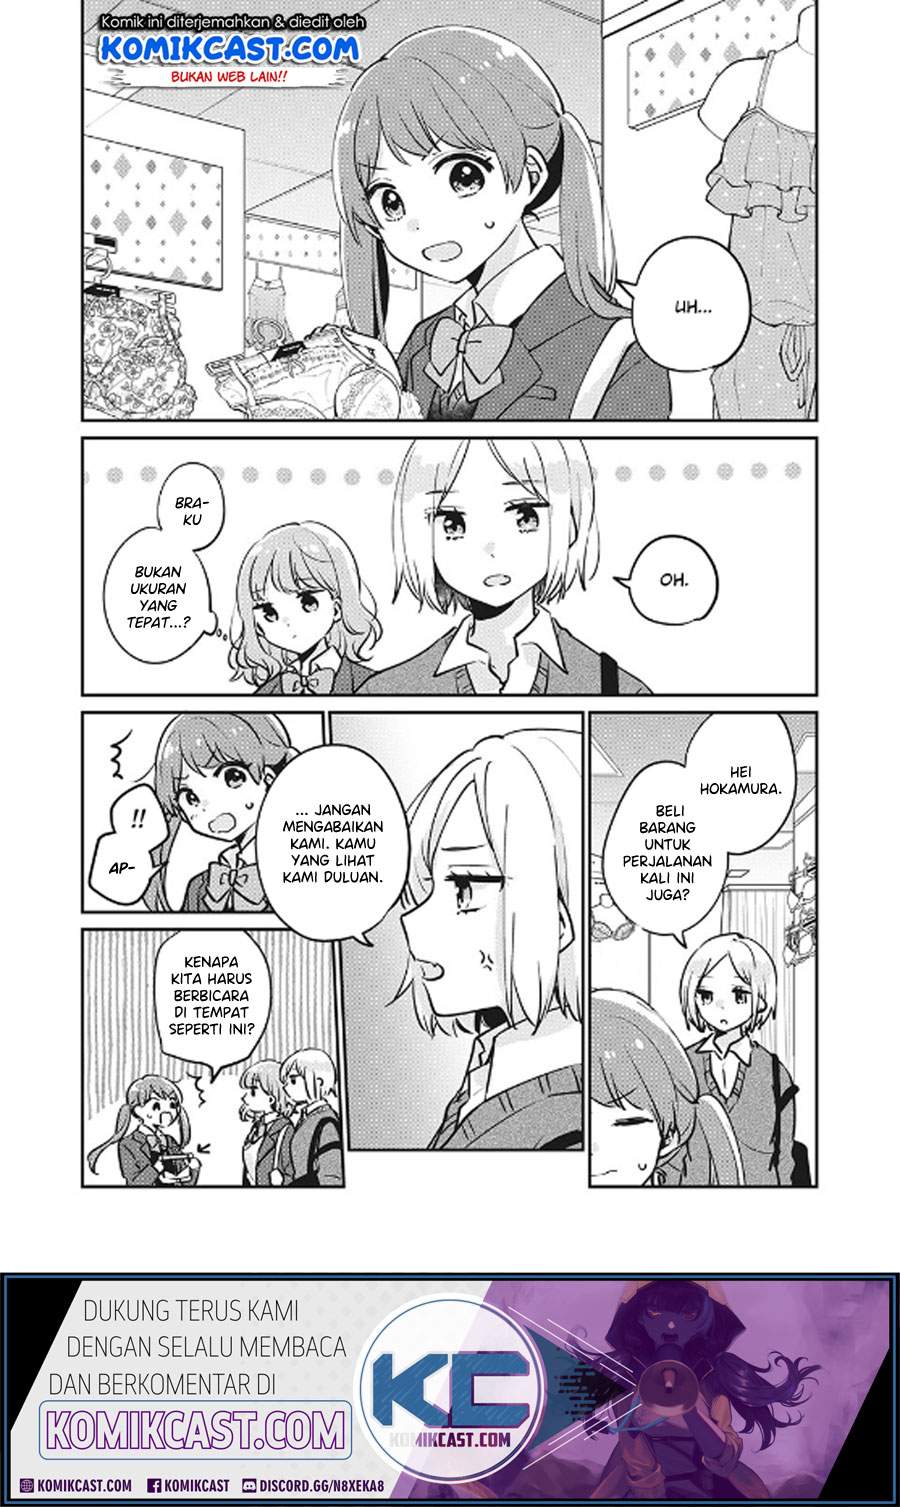 It’s Not Meguro-san’s First Time Chapter 28 Bahasa Indonesia